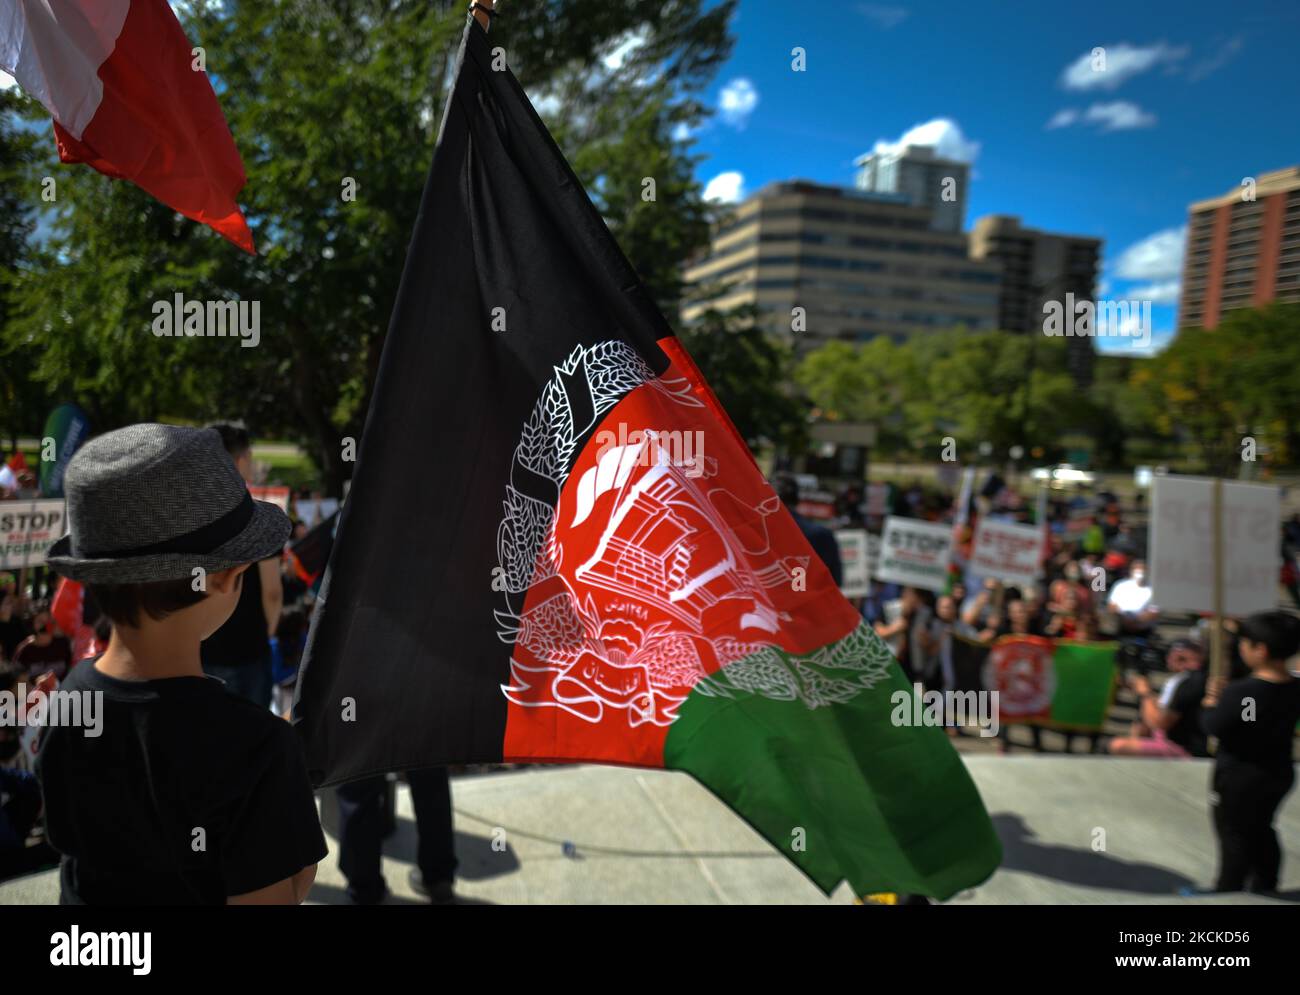 A young boy holds a striped black-red-green national flag of Afghanistan. Members of the local Afghan diaspora, activists and local supporters seen in front of the Alberta Legislature Building during the STOP KILLING AFGHANS! protest organised today by the Global Movement of Peace for Afghanistan. Saturday, August 28, 2021, in Edmonton, Alberta, Canada. (Photo by Artur Widak/NurPhoto) Stock Photo